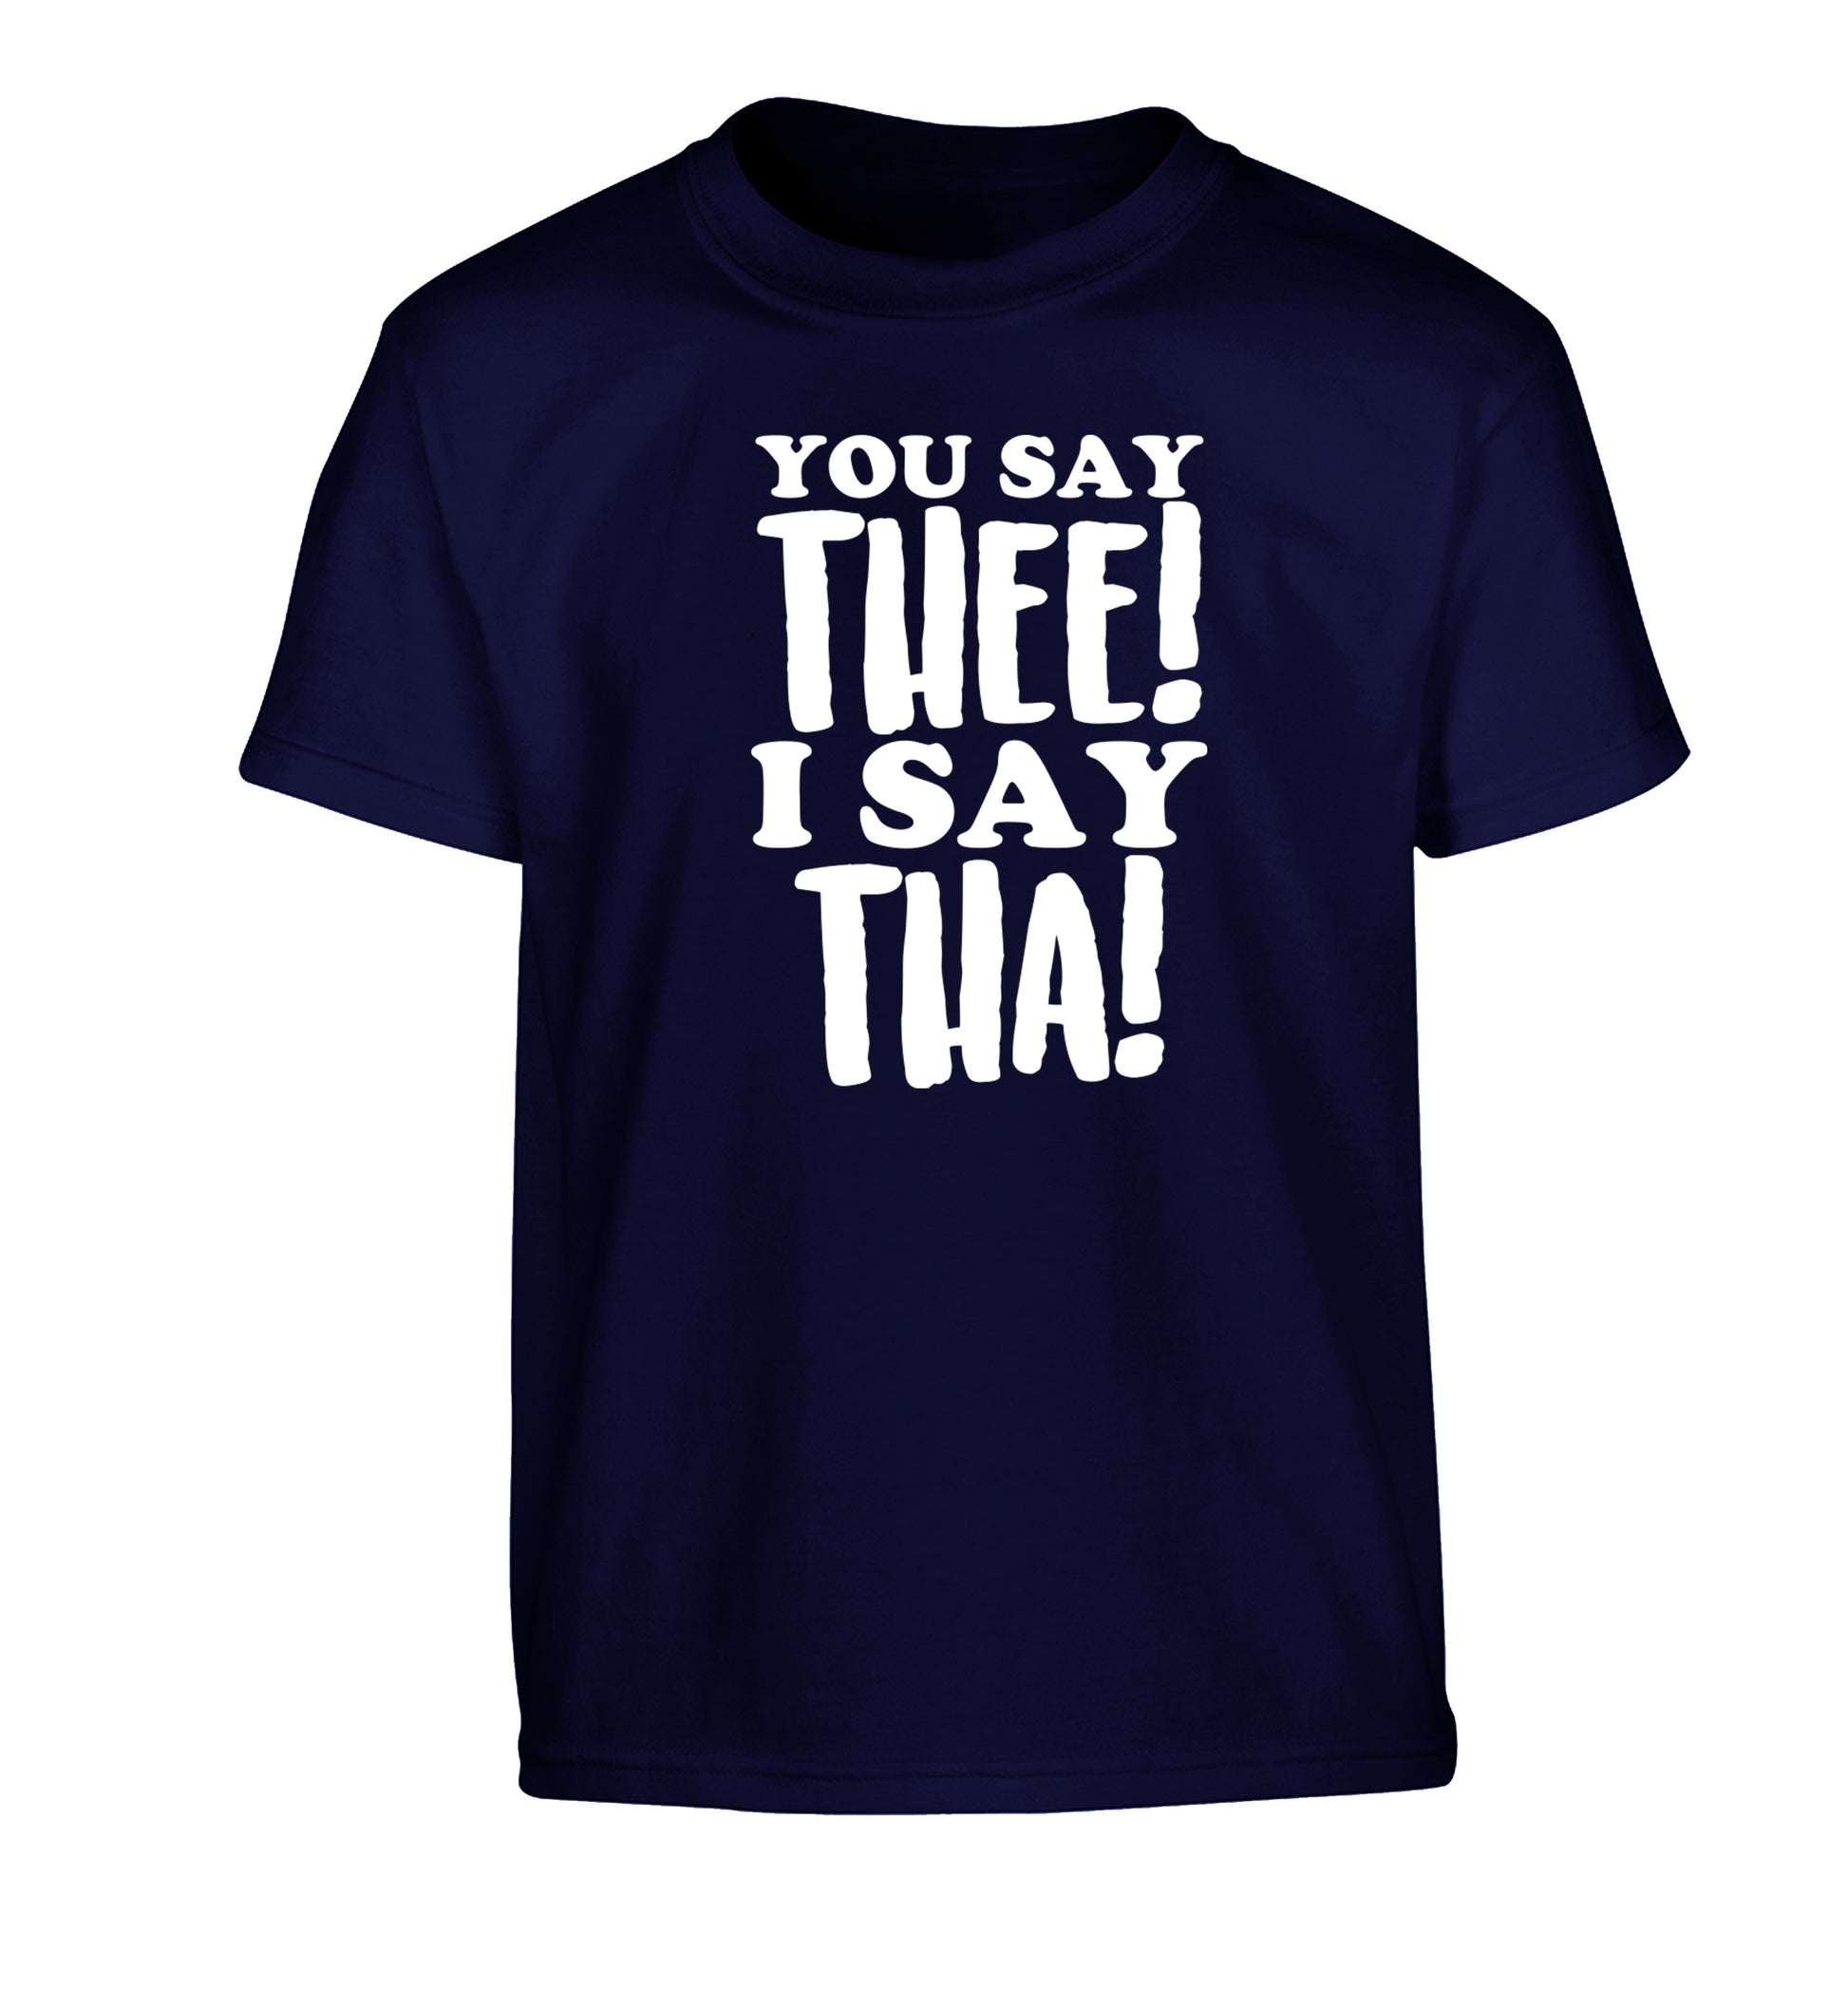 You say thee I say tha Children's navy Tshirt 12-14 Years